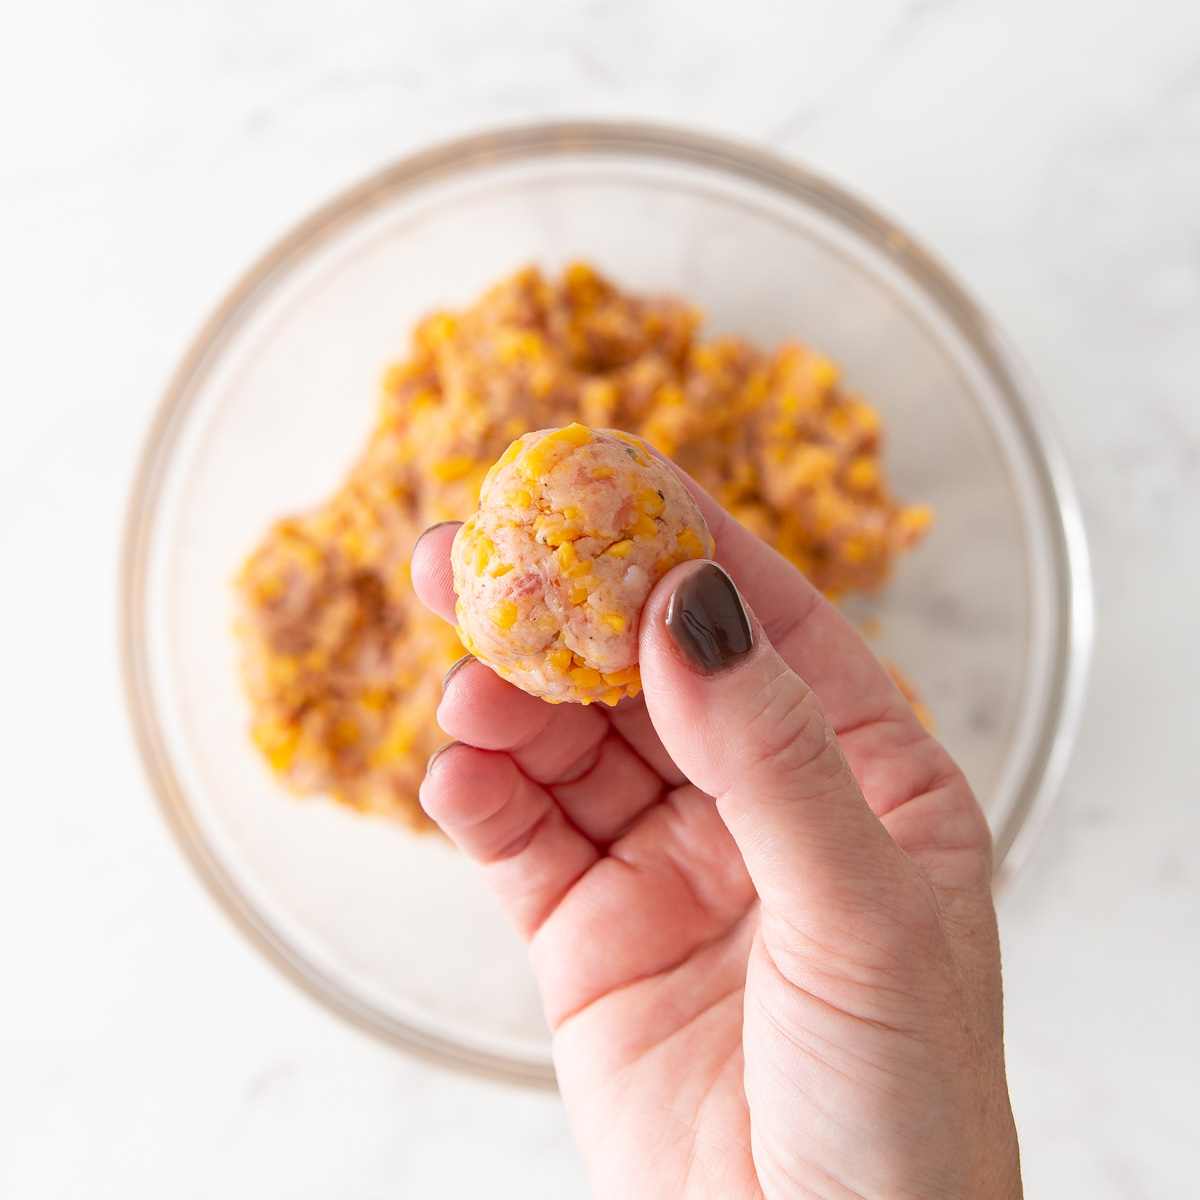 A hand holding a formed sausage cheese ball over a bowl of mixture.